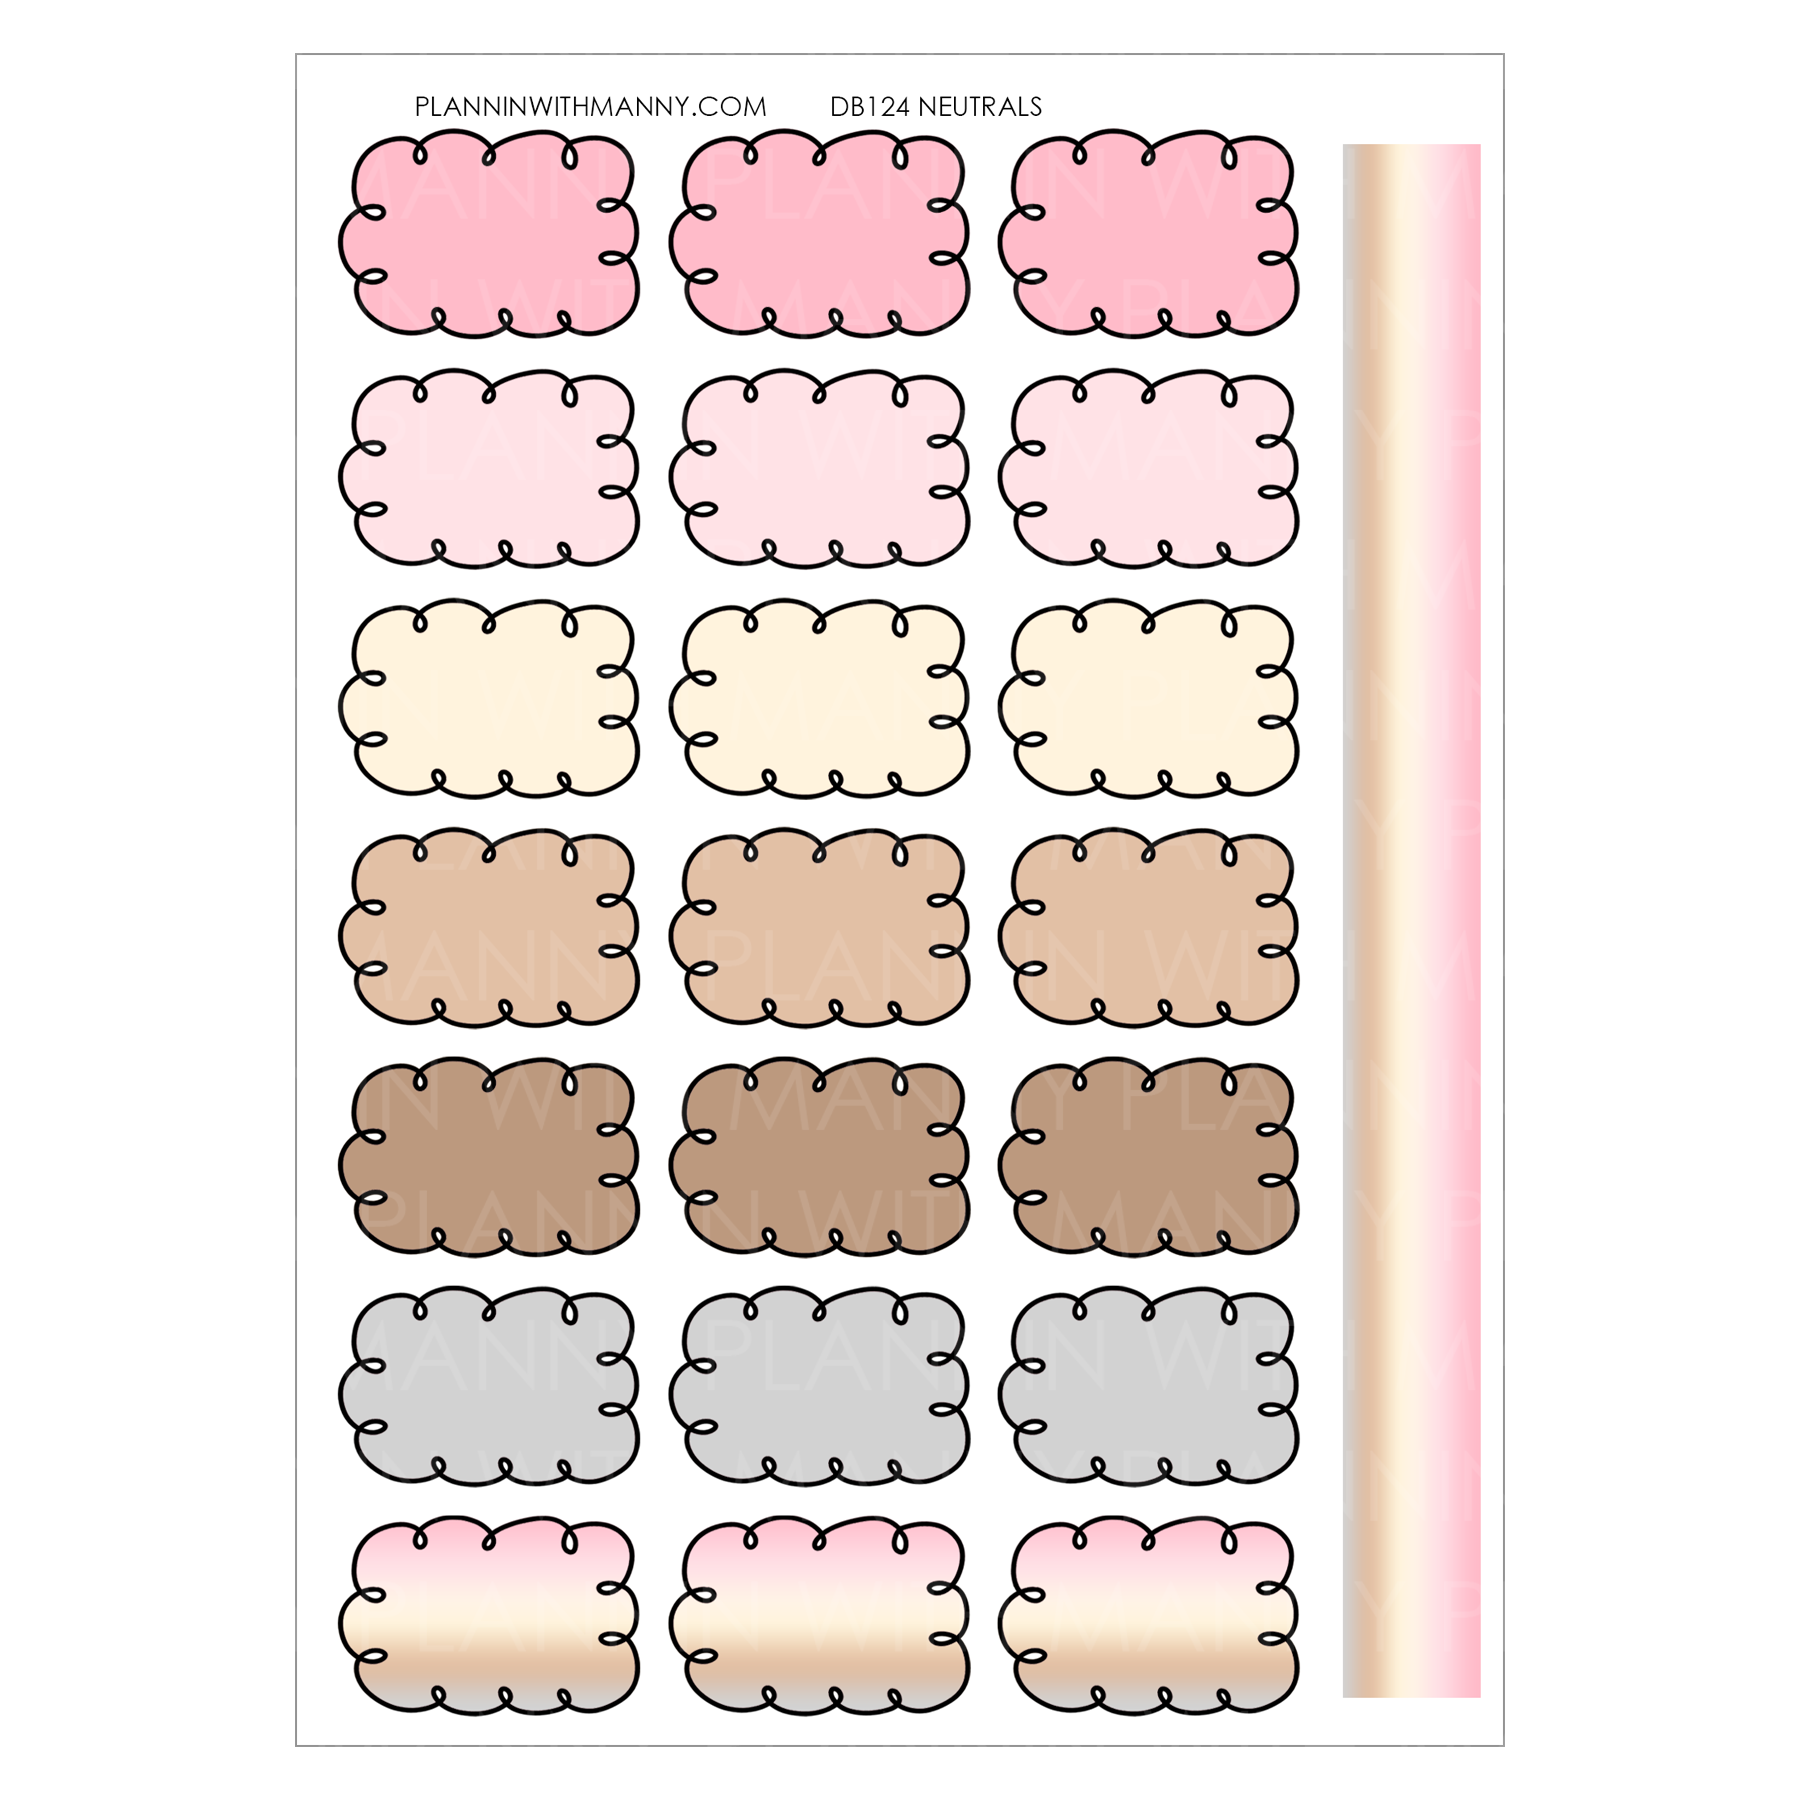 DB124 1.3" NEUTRAL Doodle Half Box Planner Stickers